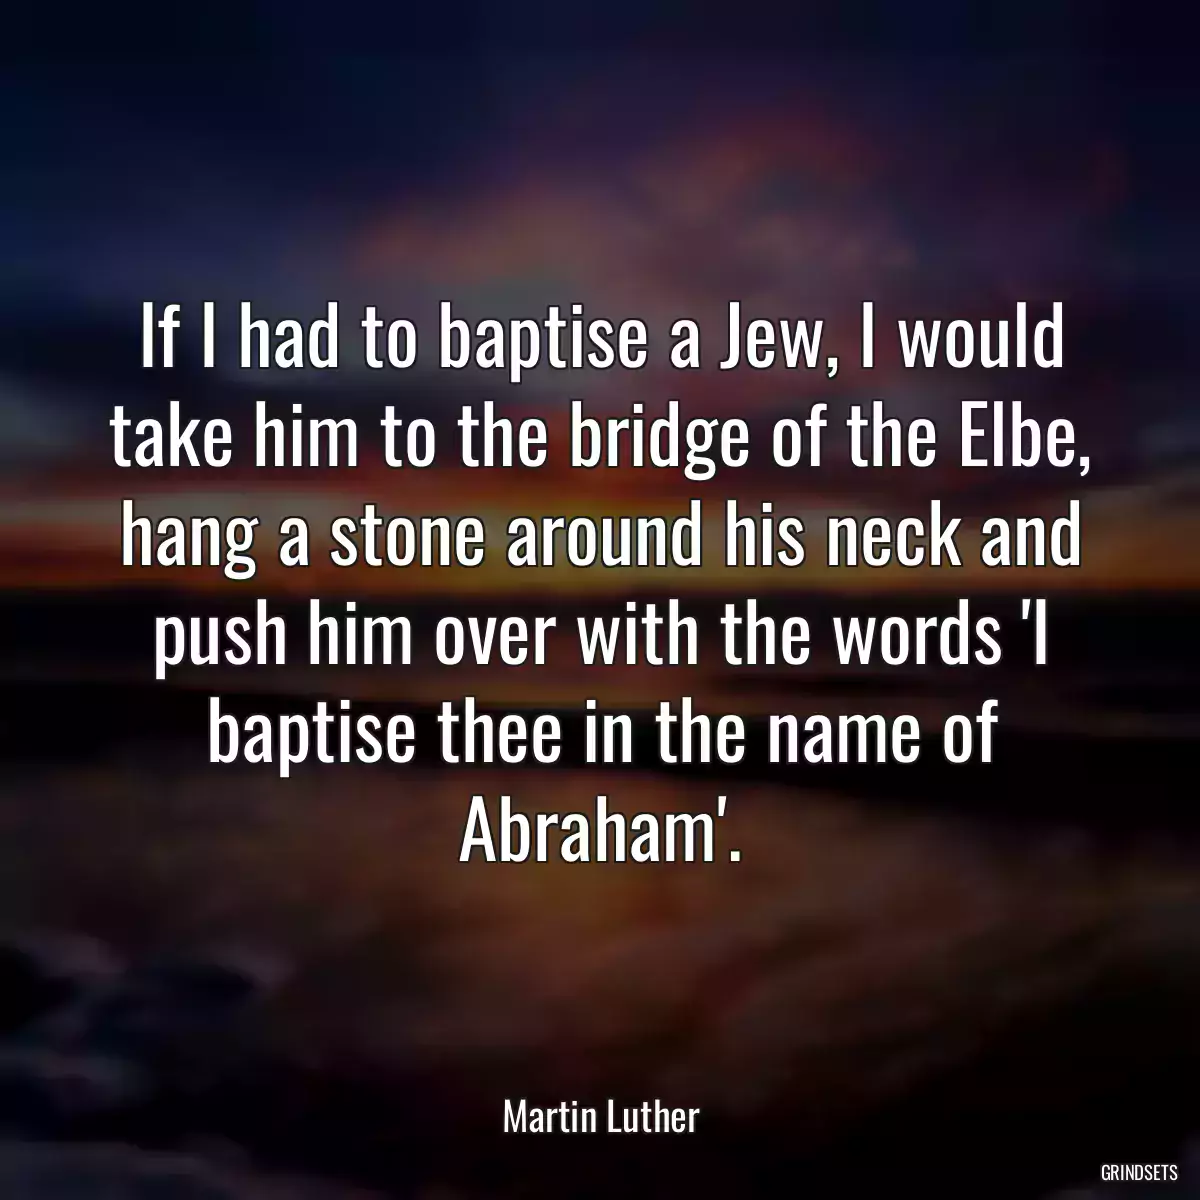 If I had to baptise a Jew, I would take him to the bridge of the Elbe, hang a stone around his neck and push him over with the words \'I baptise thee in the name of Abraham\'.